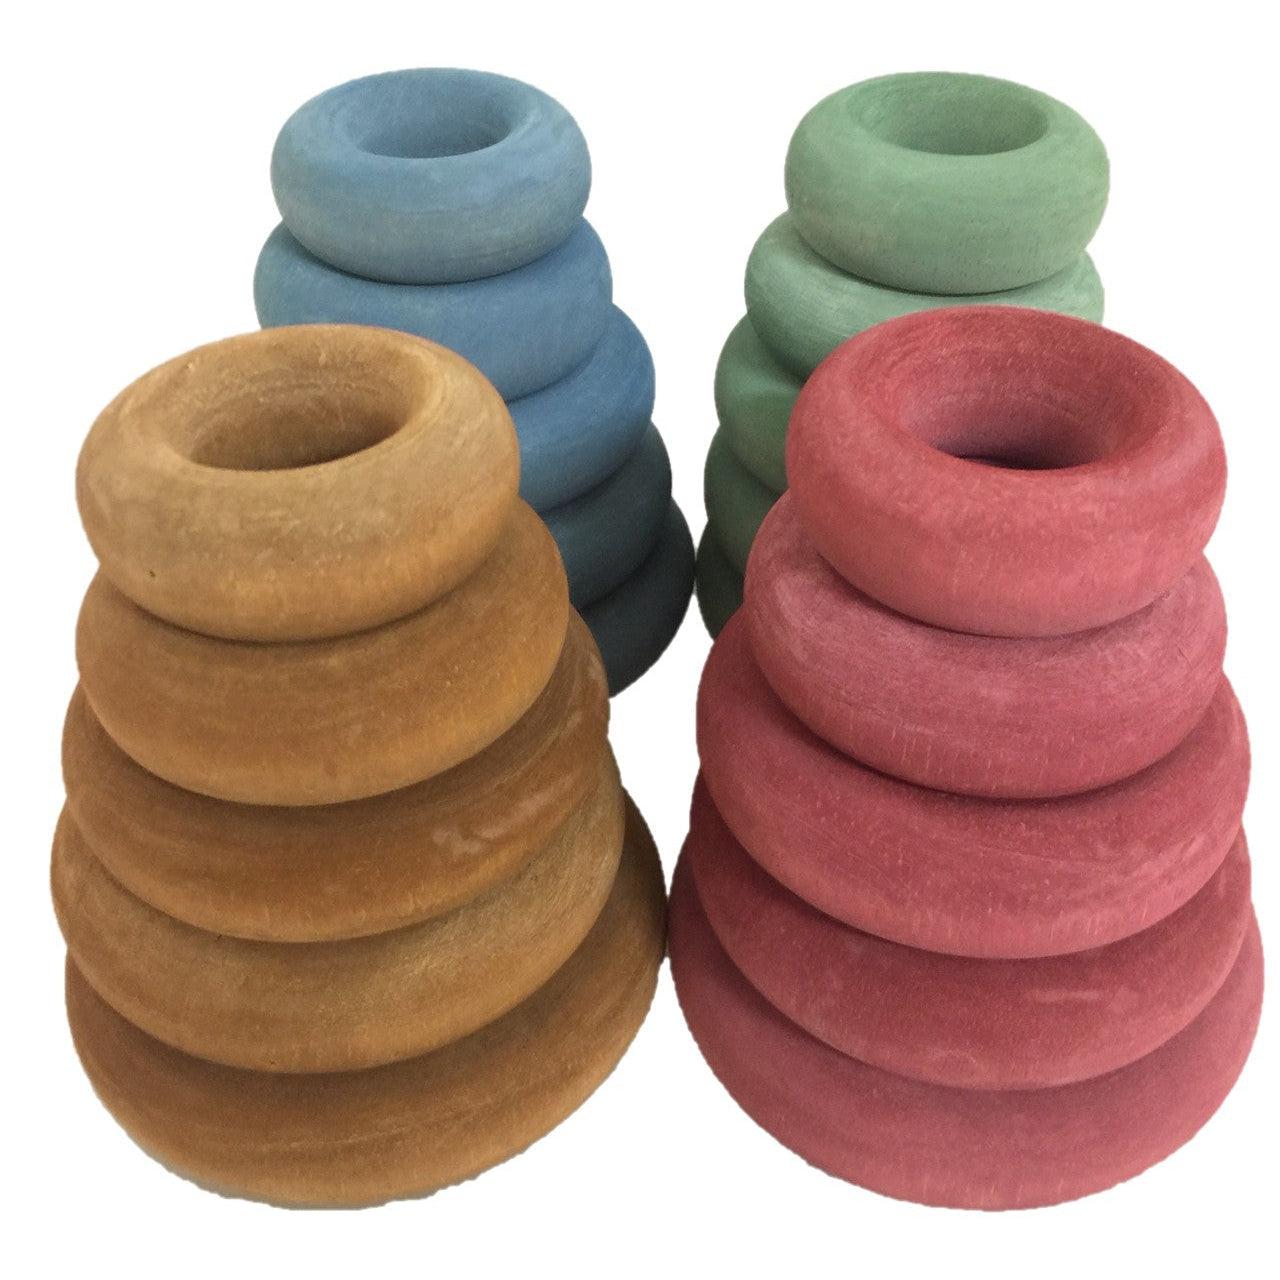 Papoose Earth Doughnuts - Wood - 5 Pieces